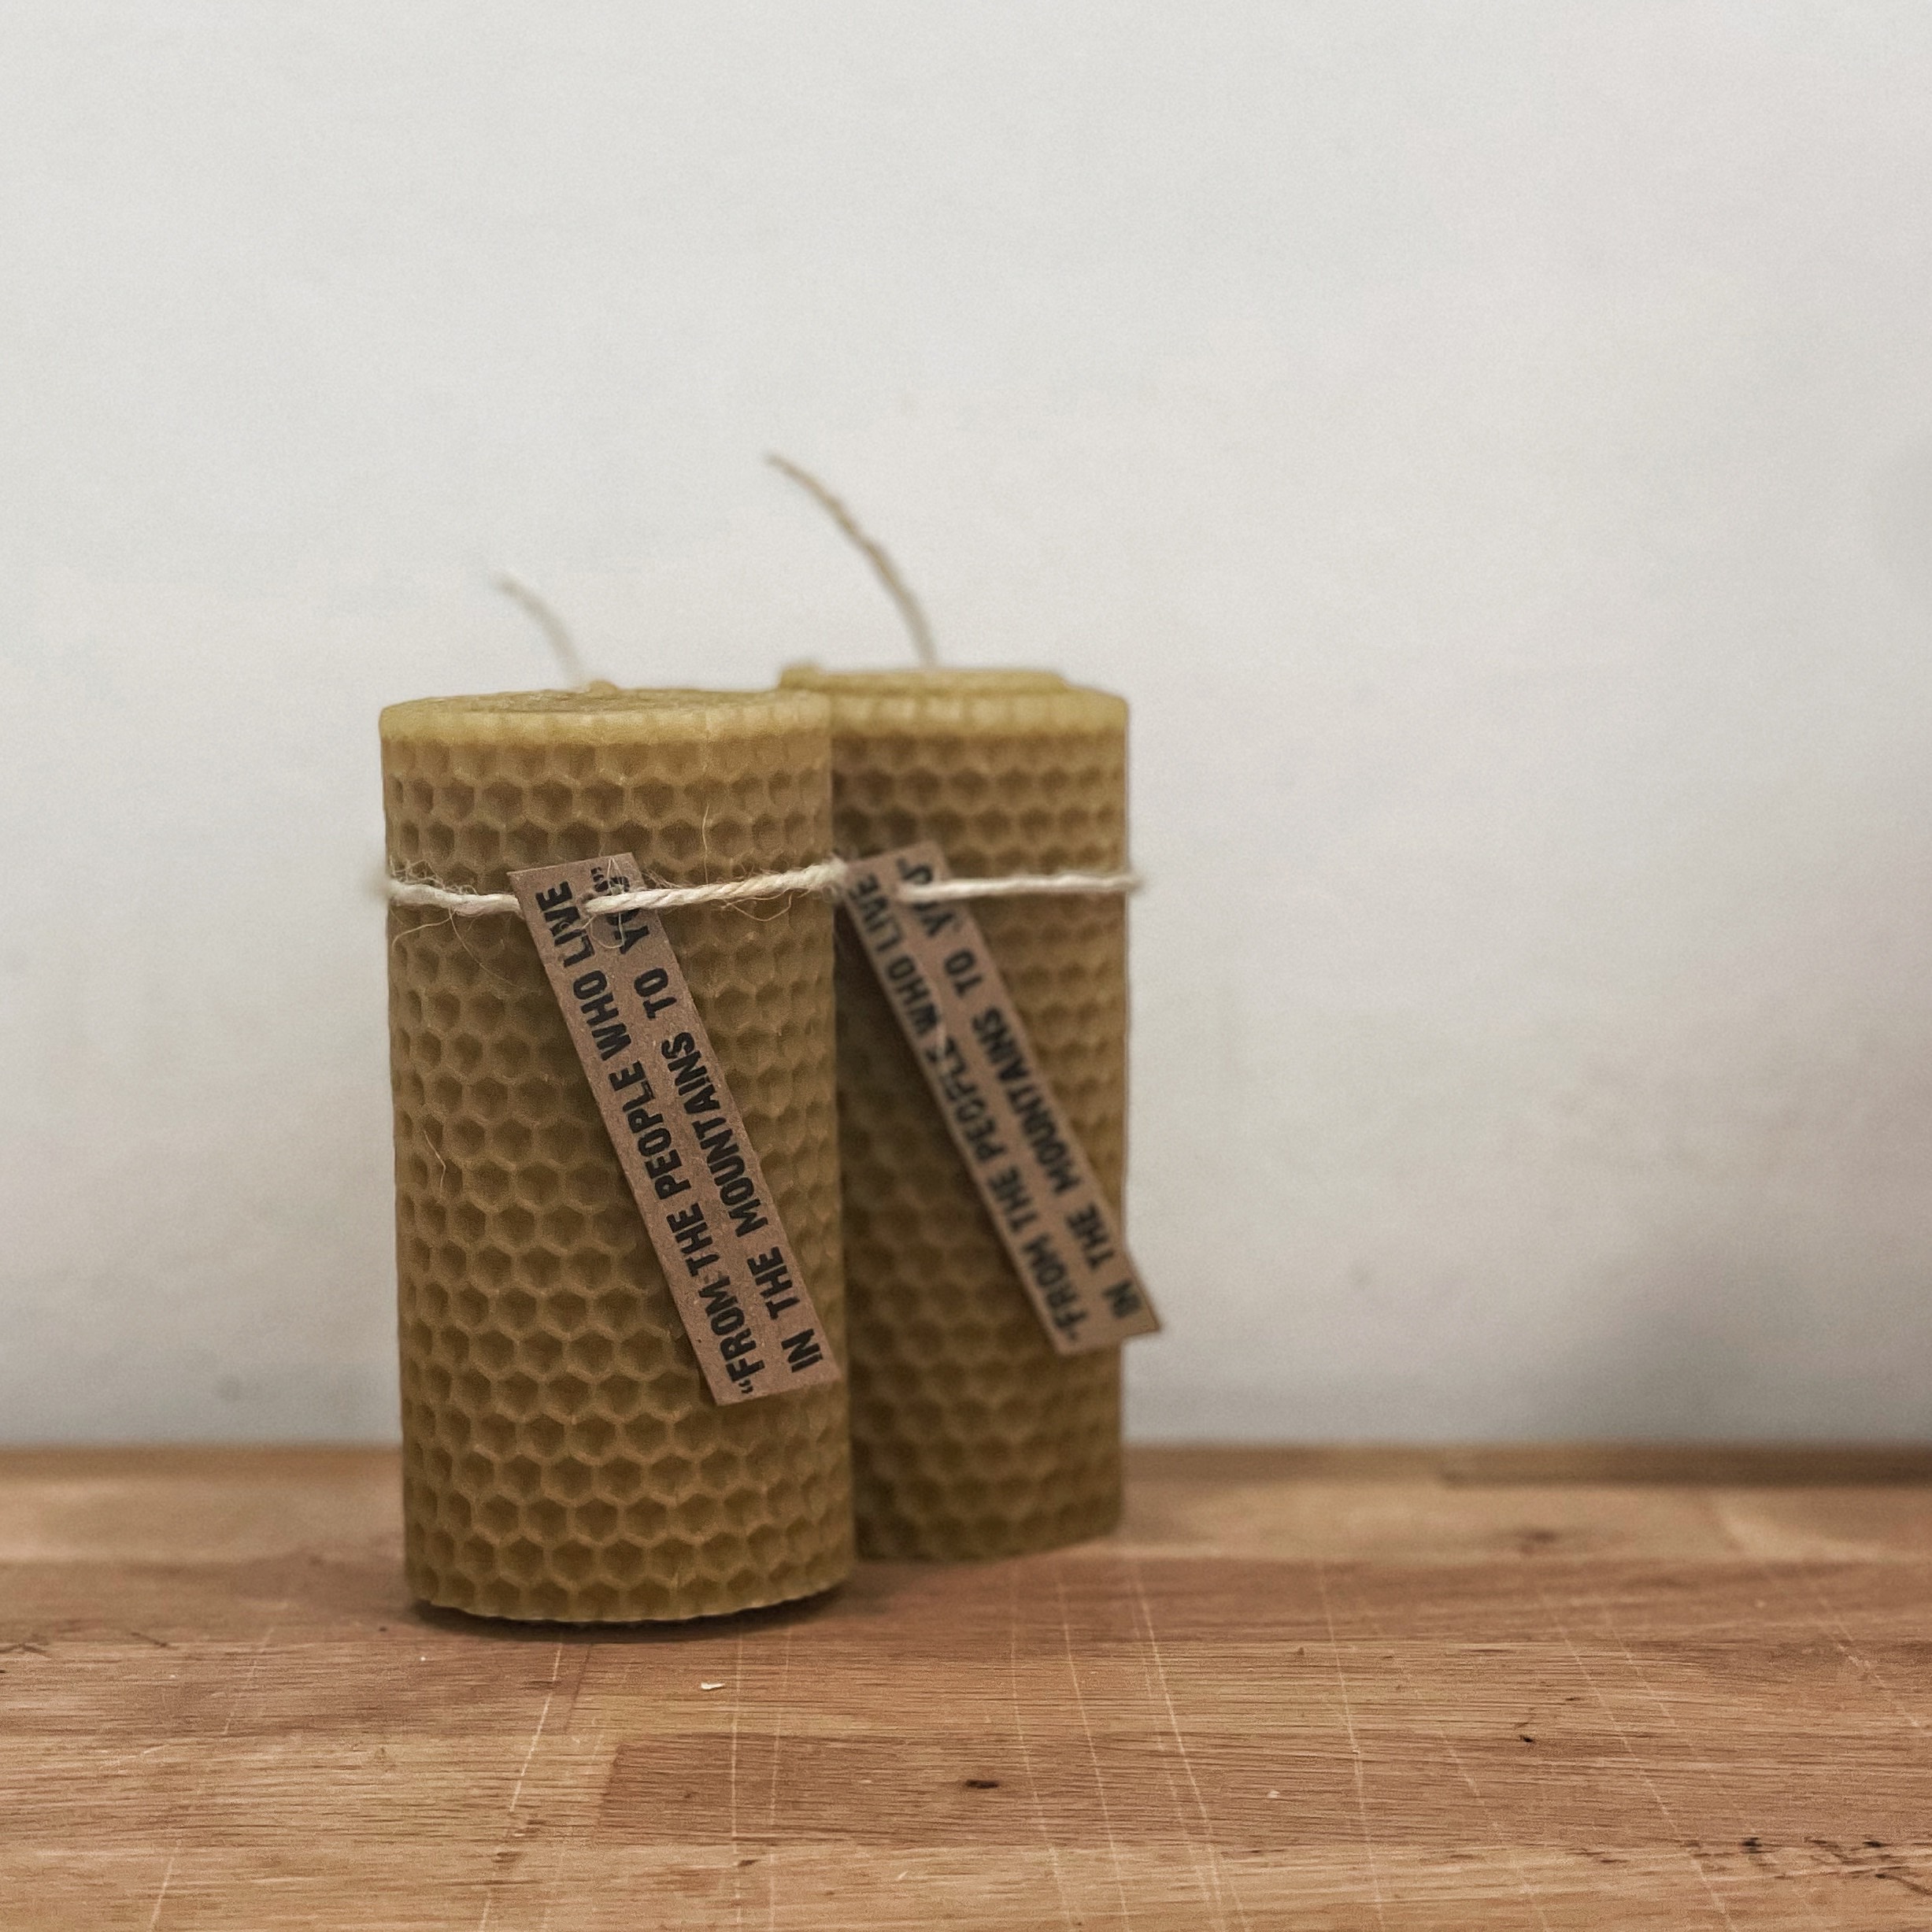 Handmade beeswax candle "FROM THE PEOPLE WHO LIVE IN THE MOUNTAINS"